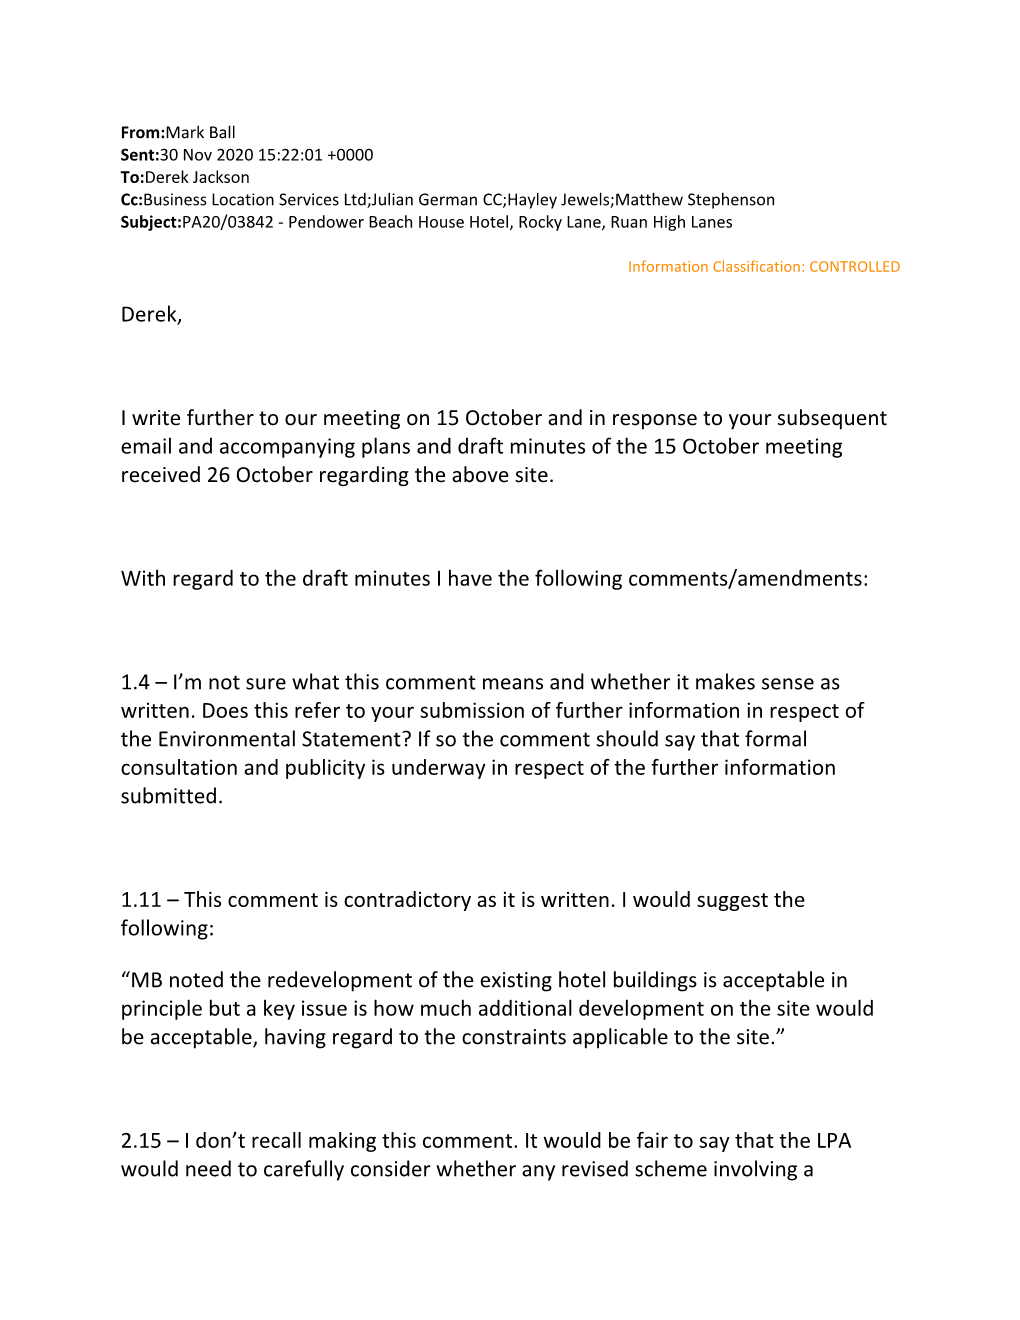 Derek, I Write Further to Our Meeting on 15 October and in Response to Your